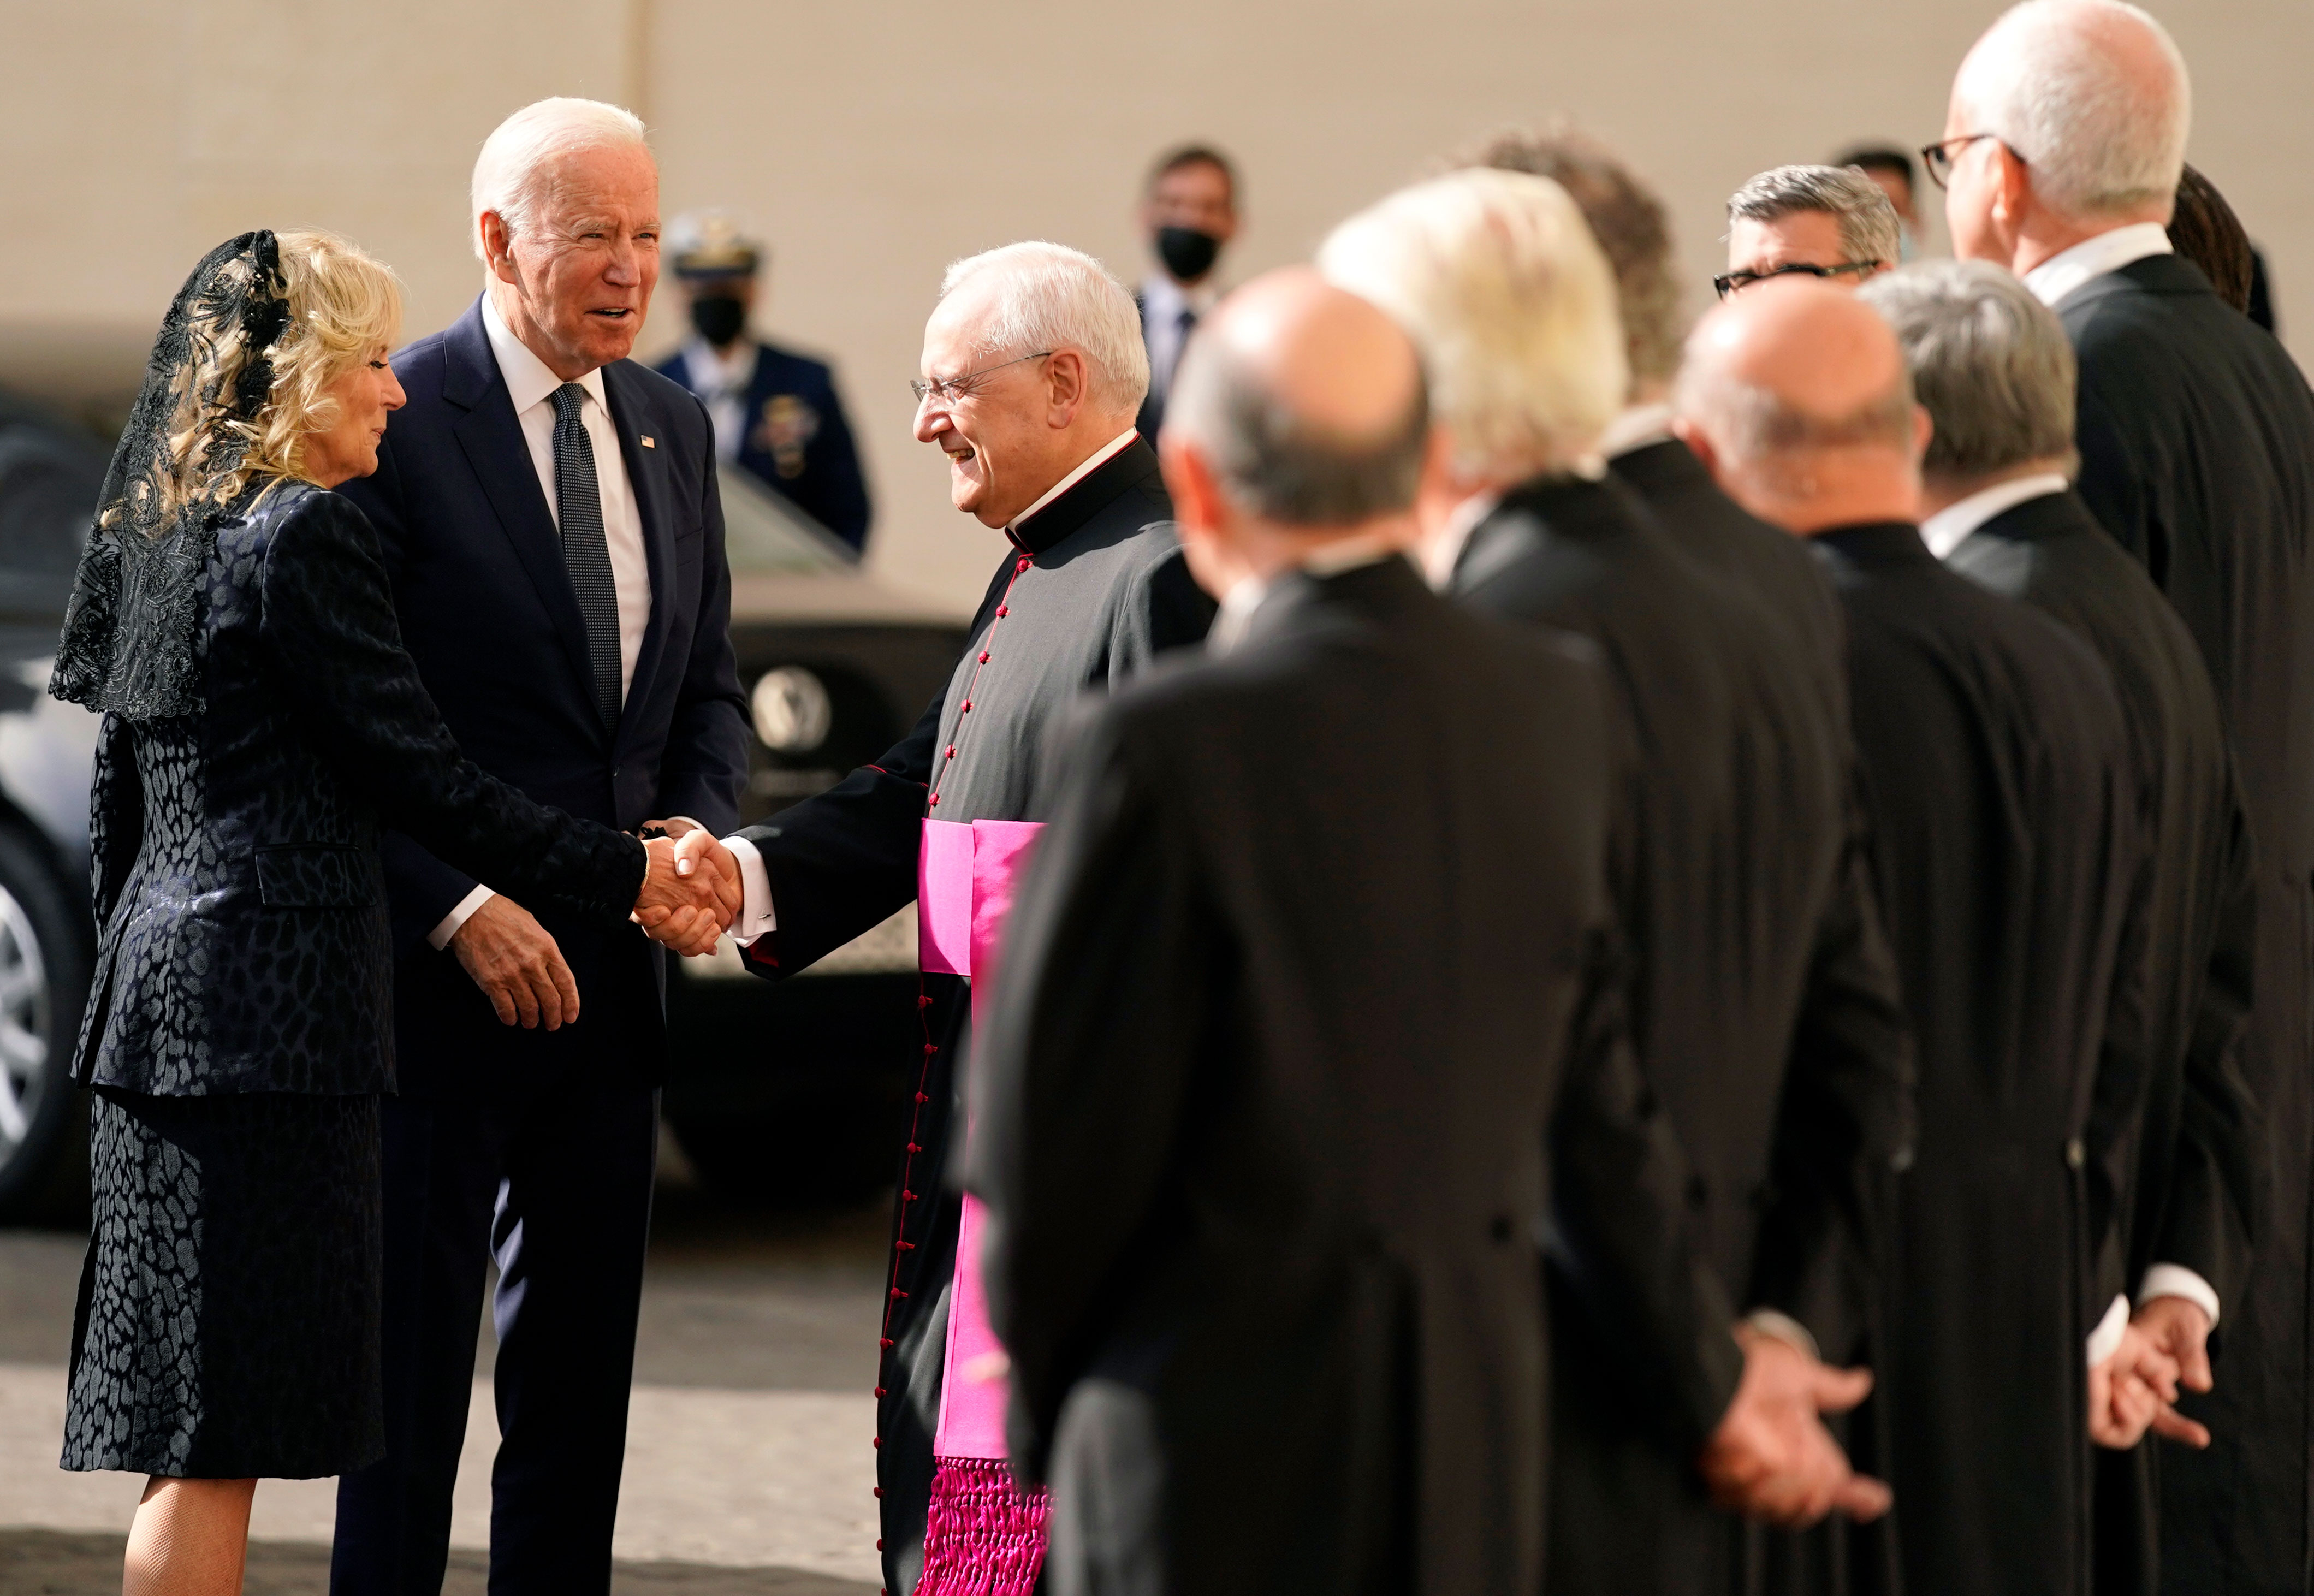 President Joe Biden and first lady Jill Biden are greeted by the Head of the Papal Household, Mons. Leonardo Sapienza, center, as they arrive for a meeting with Pope Francis at the Vatican on October 29.